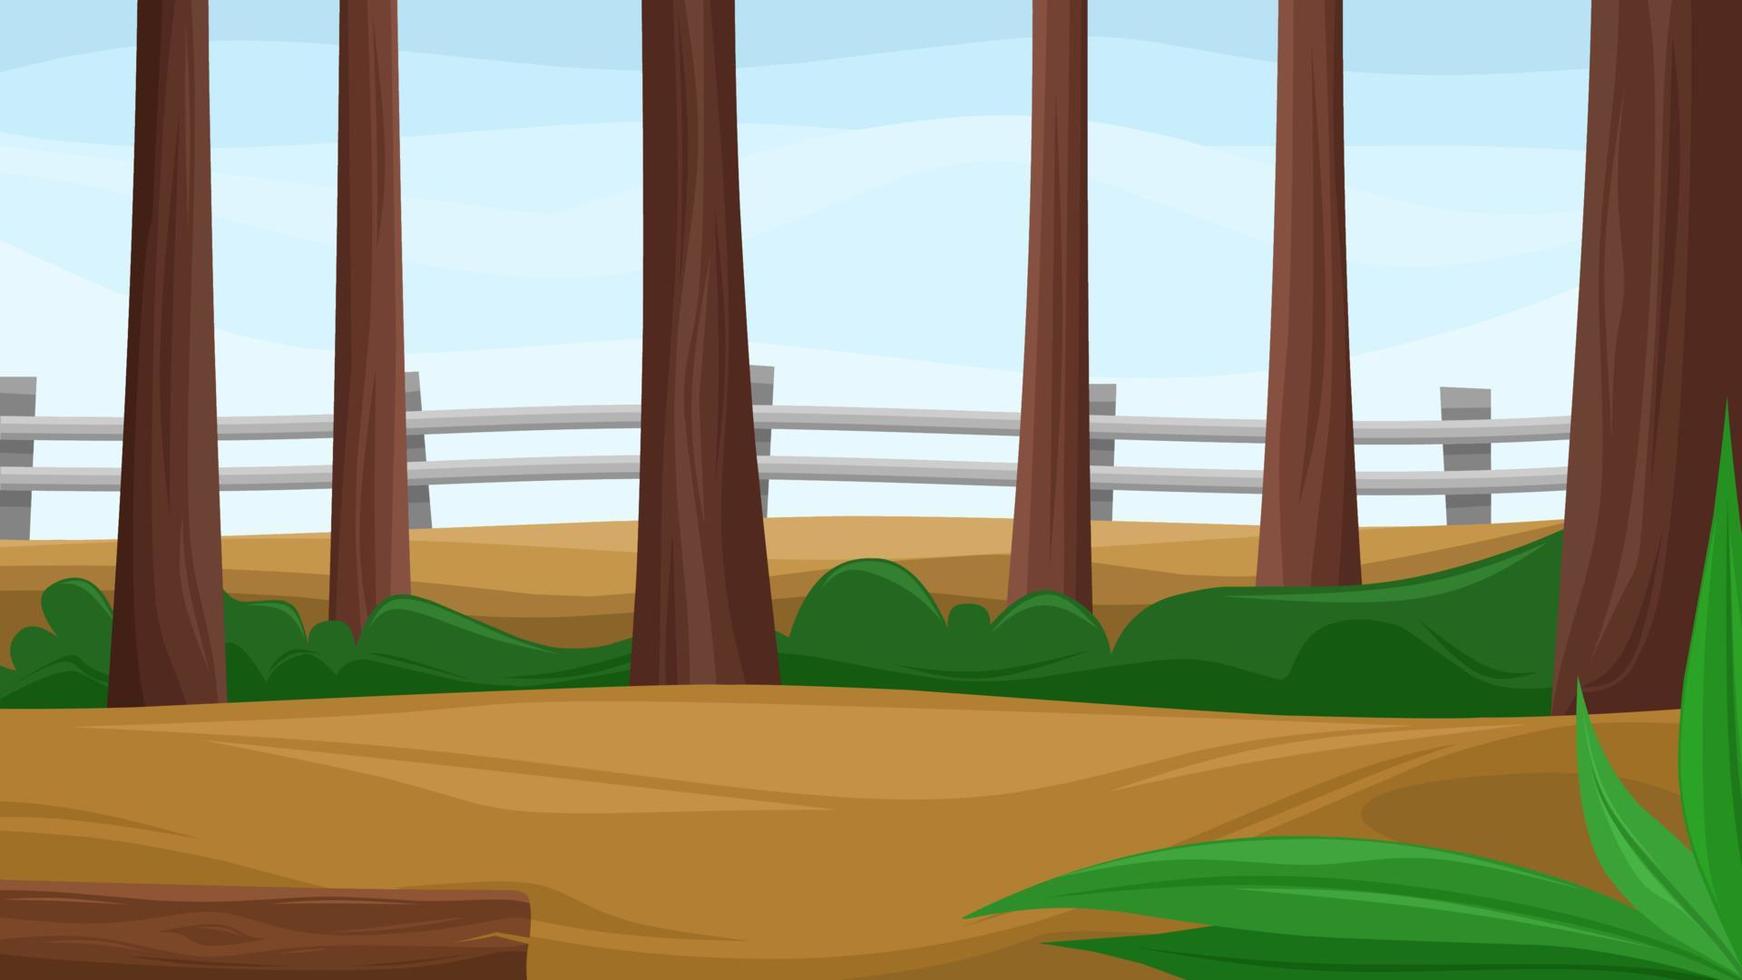 forest scenery background on the cliff with some trees and iron barrier on the cliff side vector